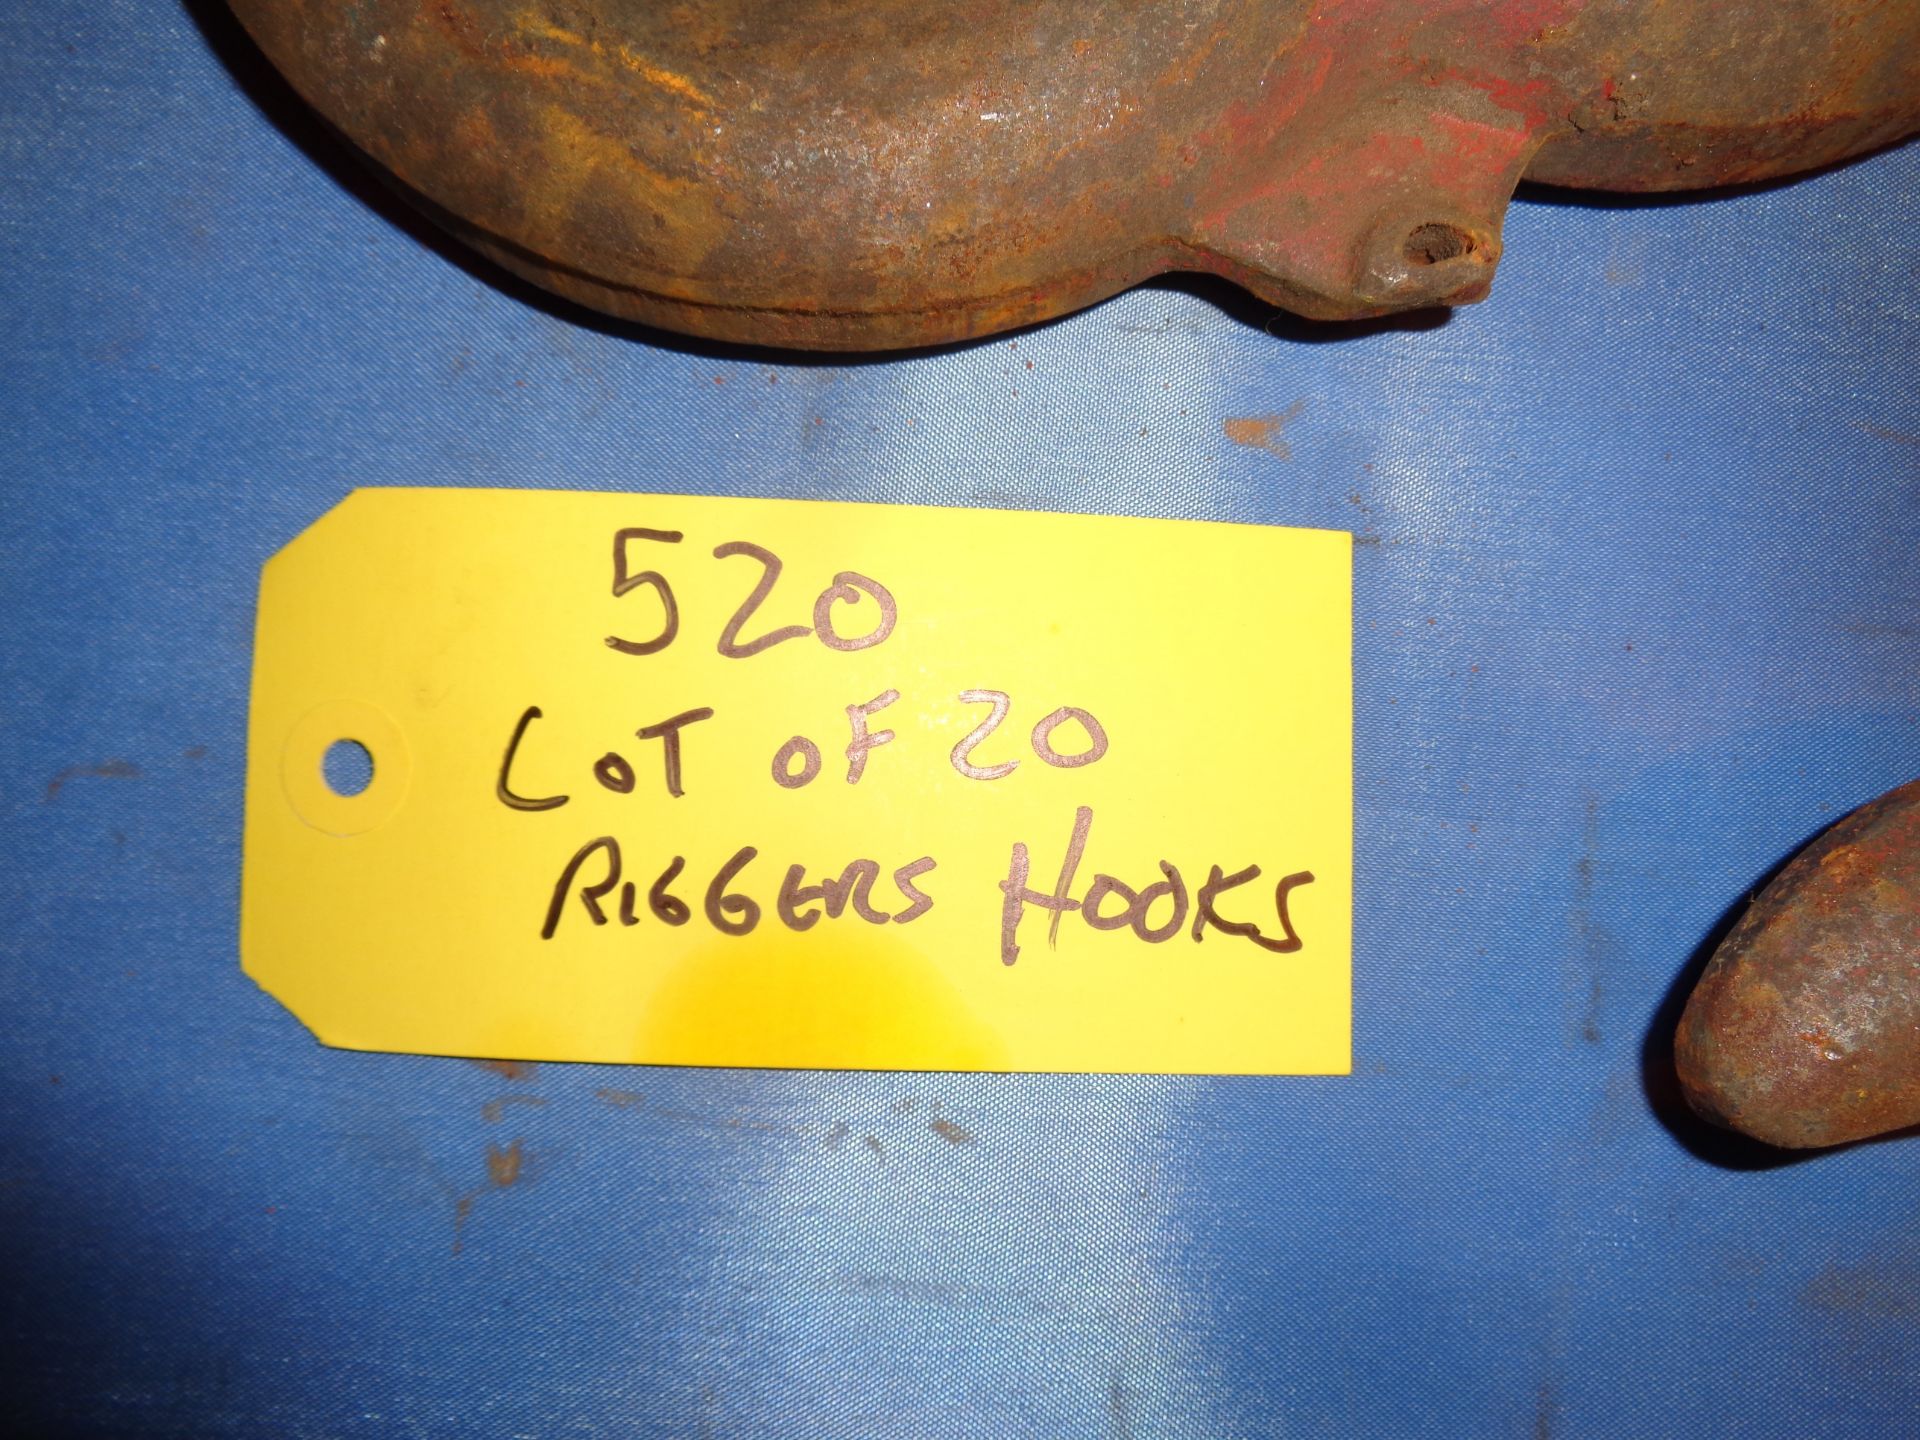 Lot of 20 Riggers Hooks (#520) - Image 9 of 9